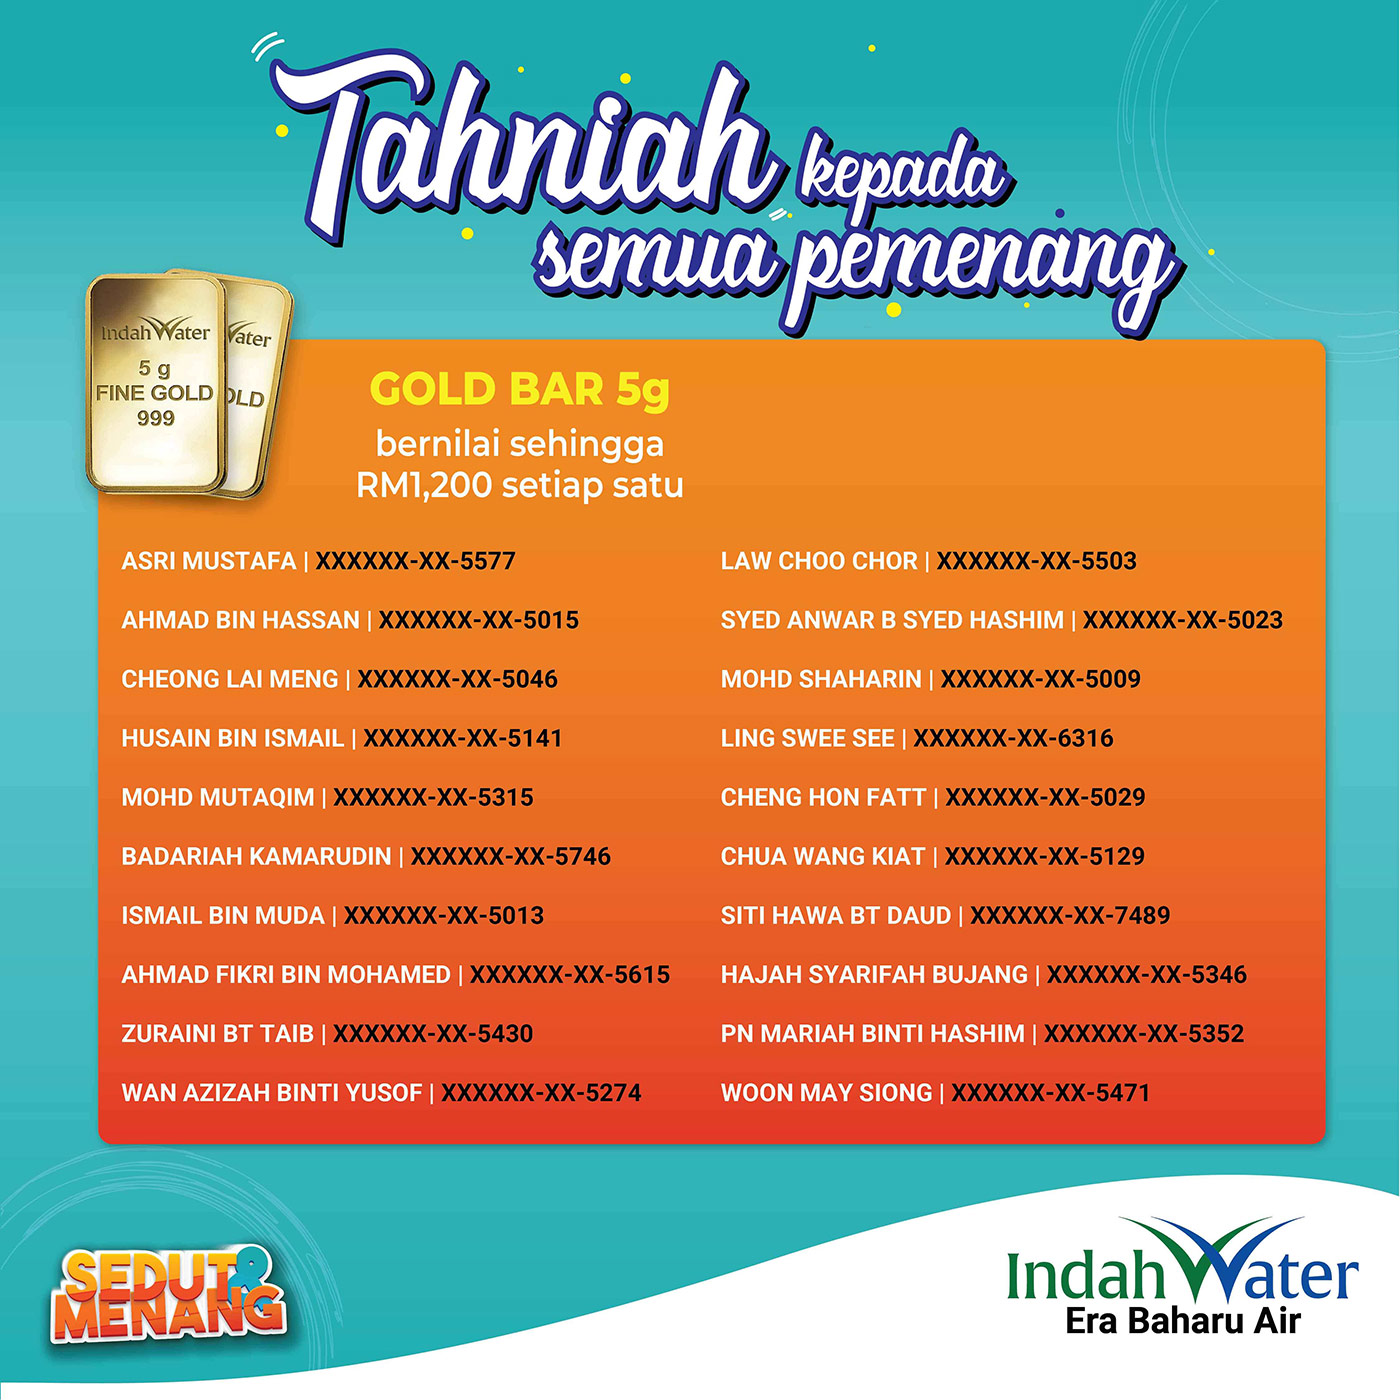 Sewerage Bill No Indah Water : Indah Water Portal - If you need your